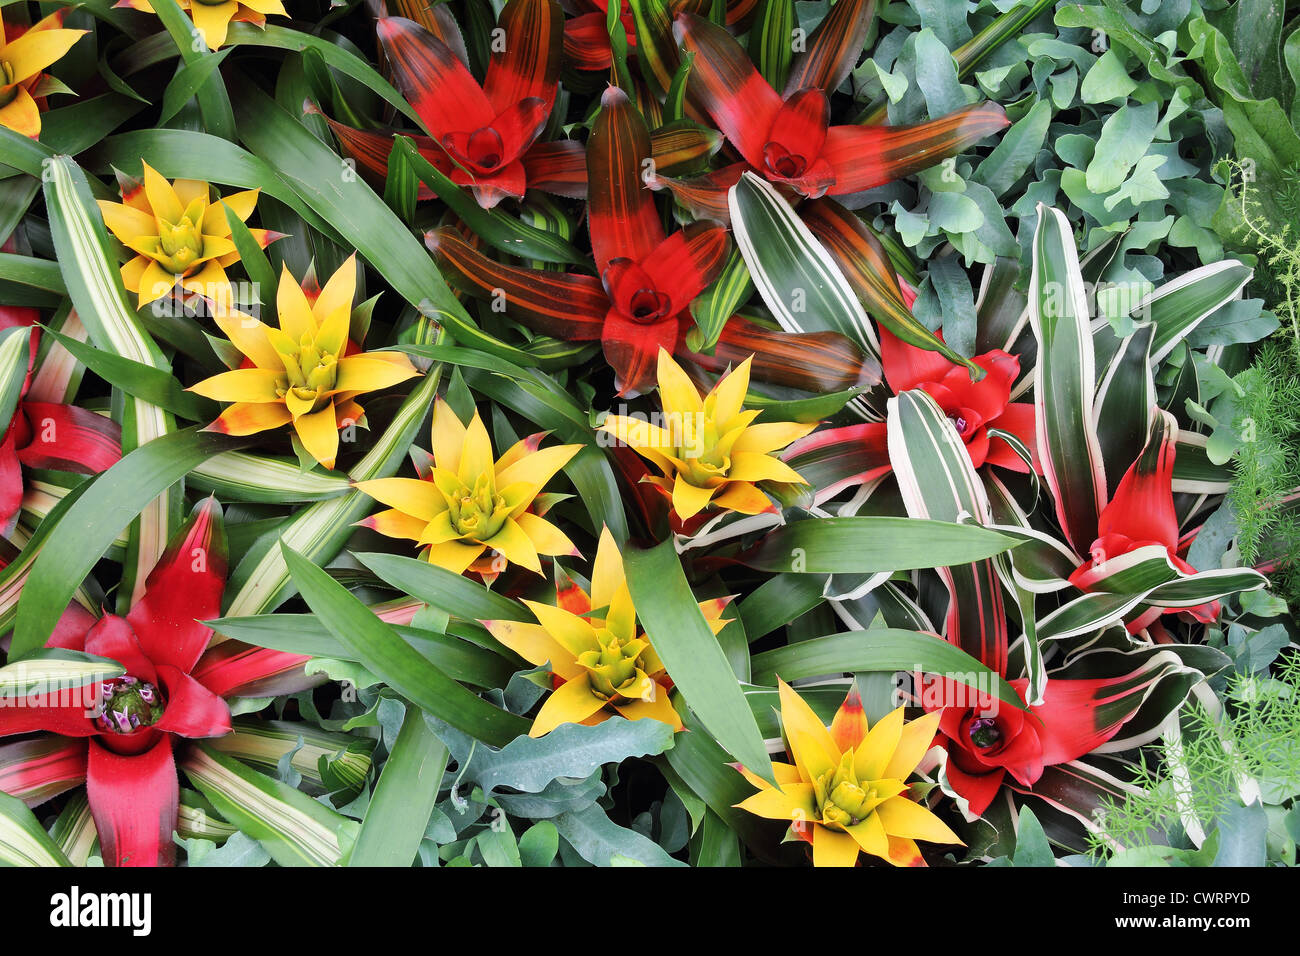 Yellow and red flowers guzmania beautiful green leaves Stock Photo